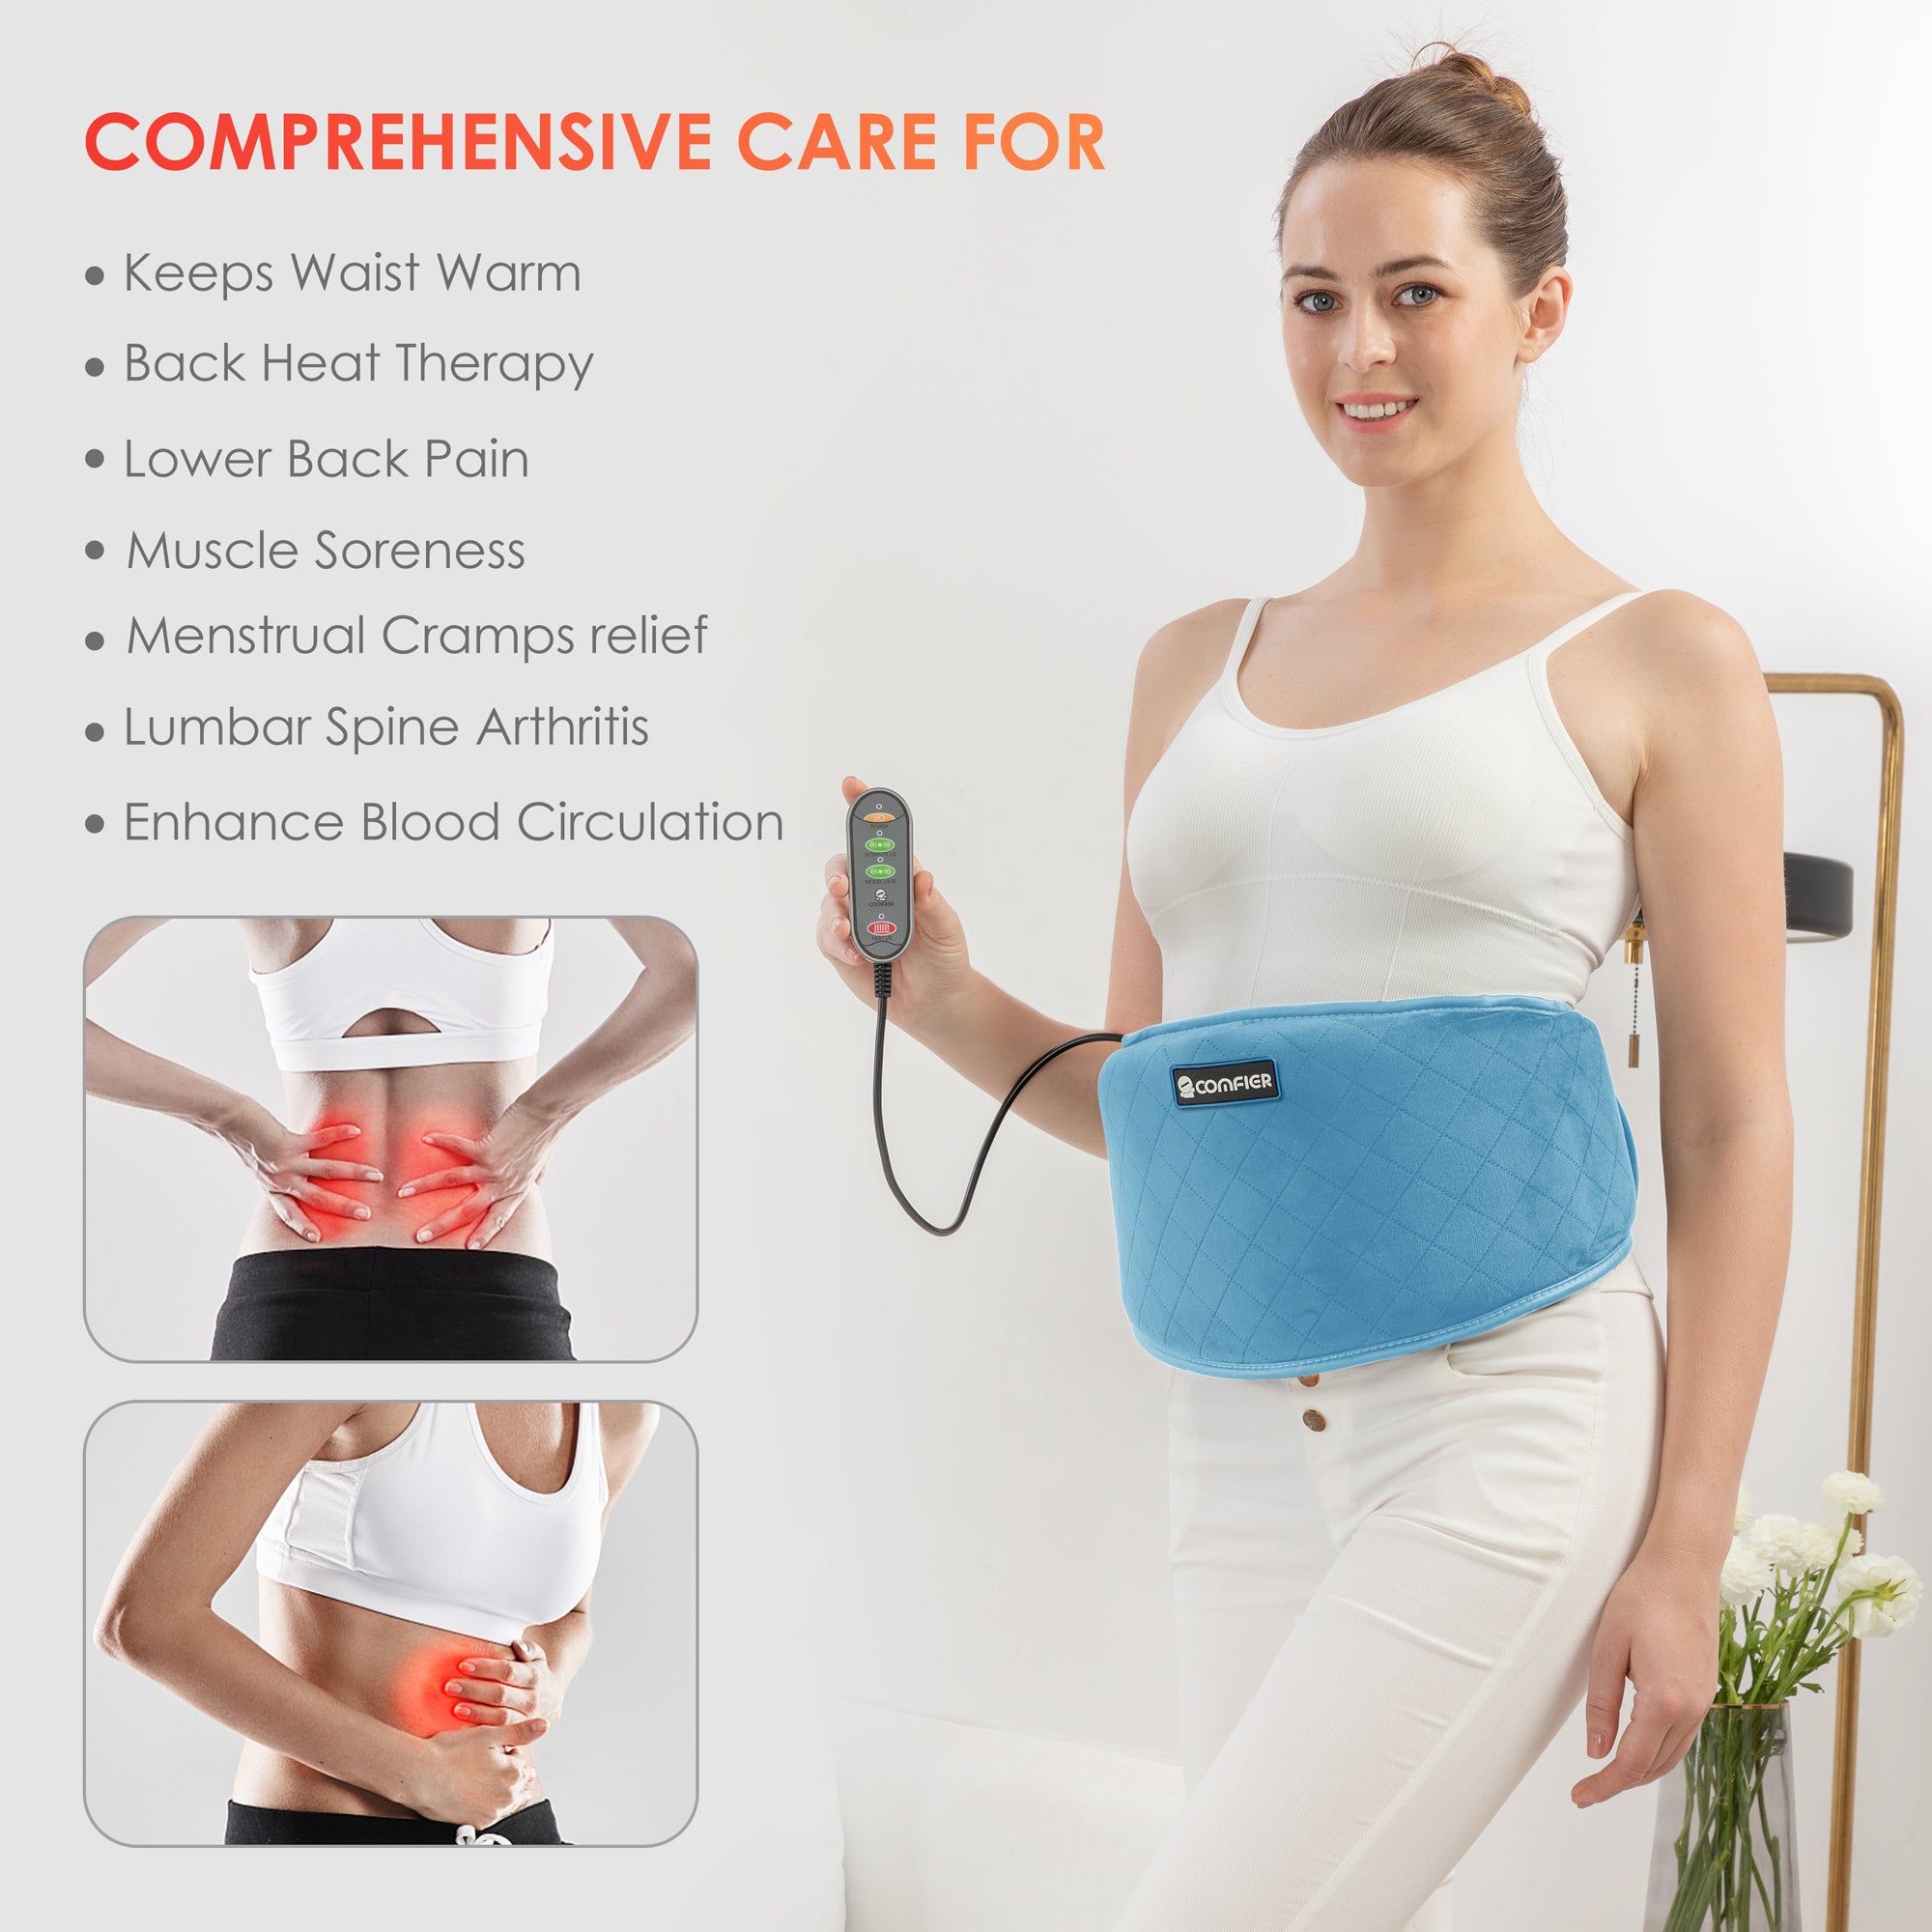 Comfier Heating Pad for Back Pain Relief, Heating Waist Belt with Adjustable Heat  - 6006NB